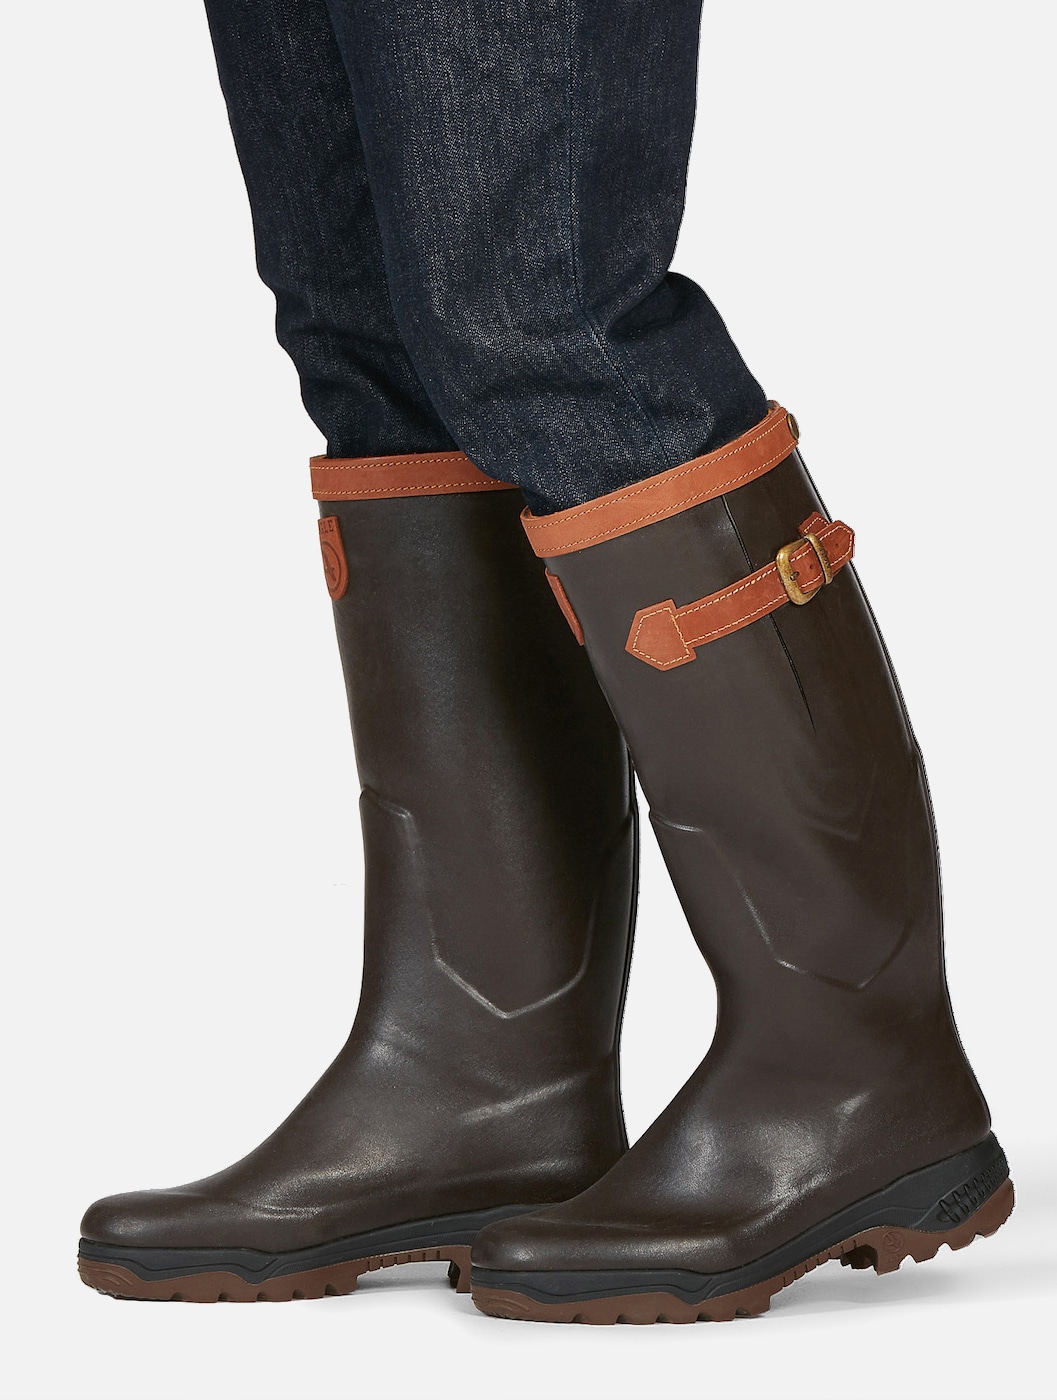 gentage passager Før Aigle - Anti-fatigue adjustable boots, Made in France Brun - Parcours® 2  signature | AIGLE